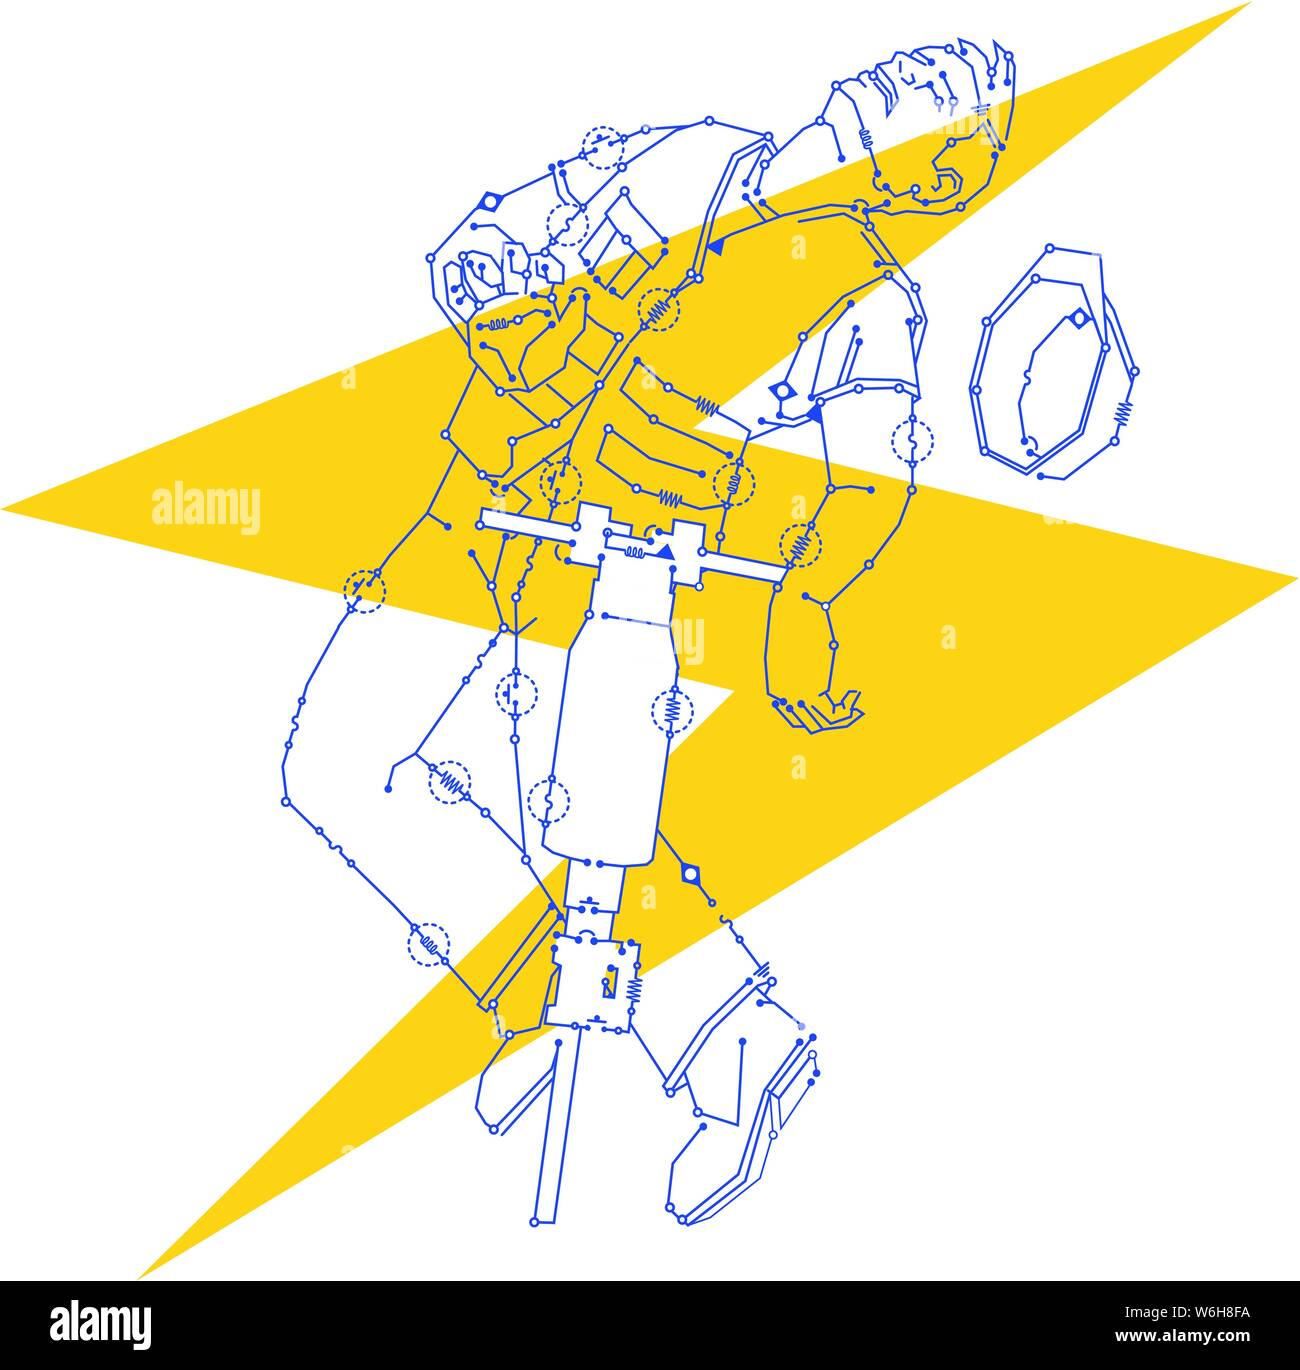 Man being electrified by undergrund electrical cable with a shock wavee z running through him. Stock Vector